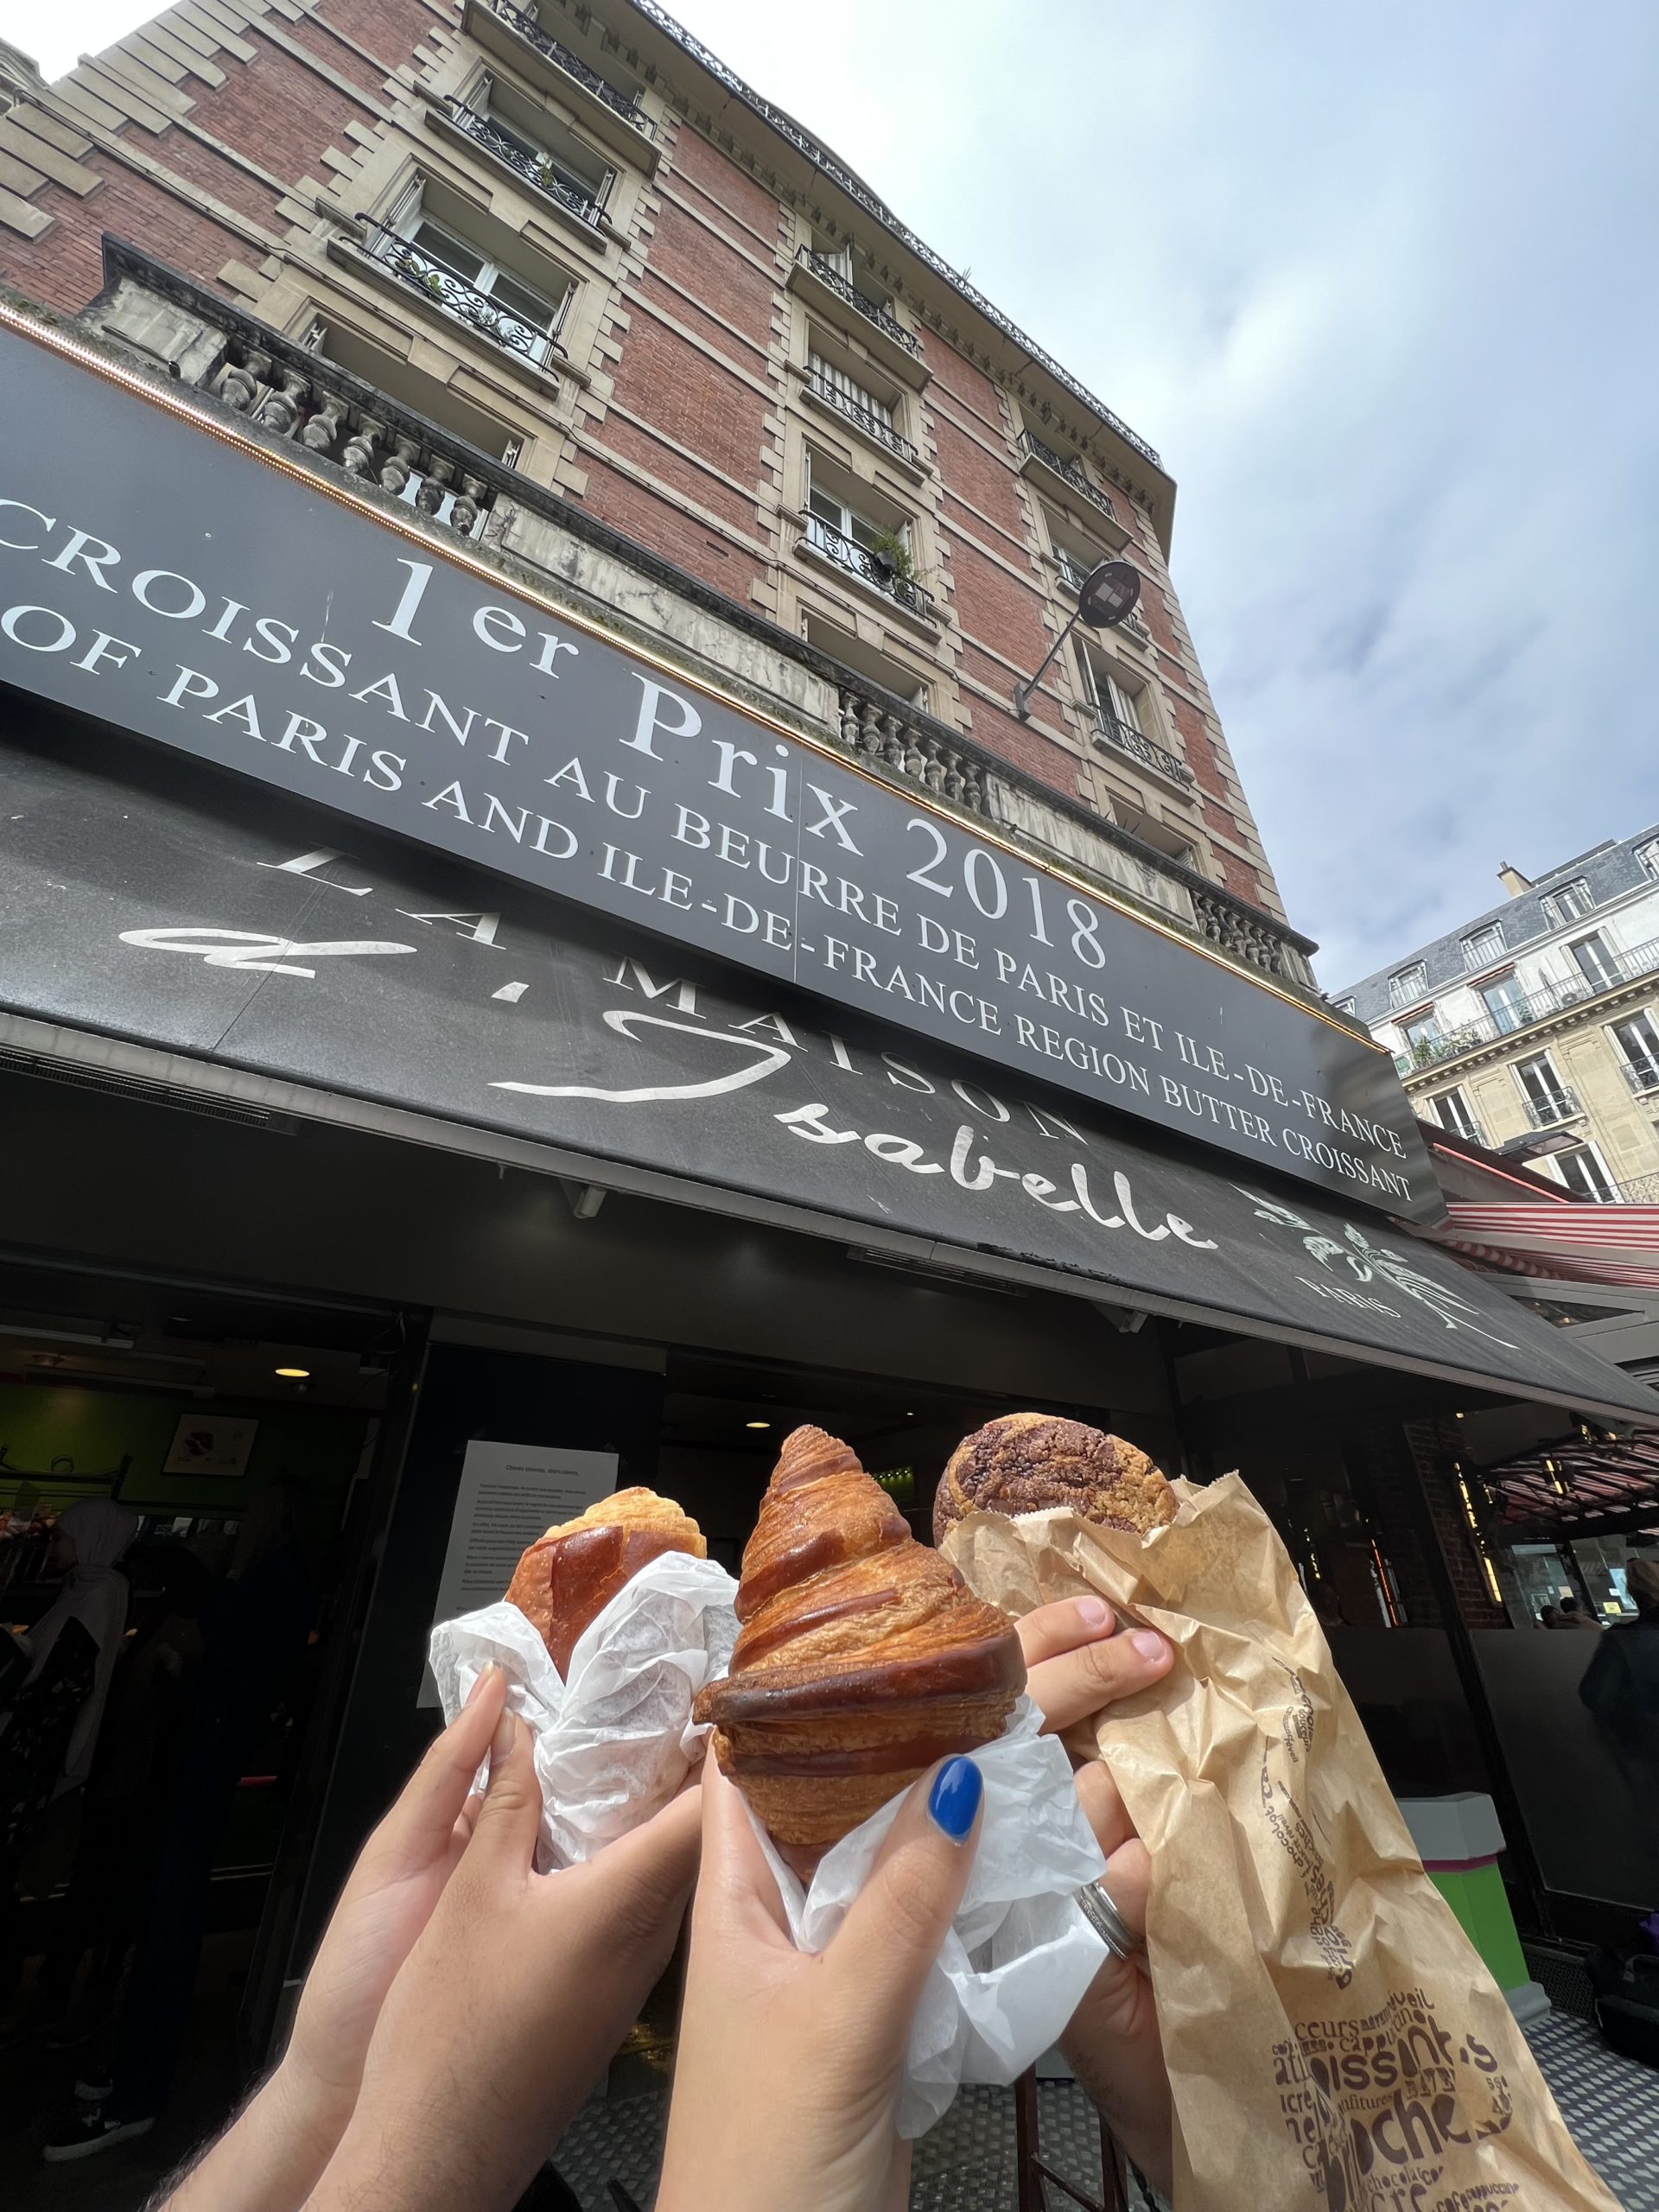 three hands hold up Croissants